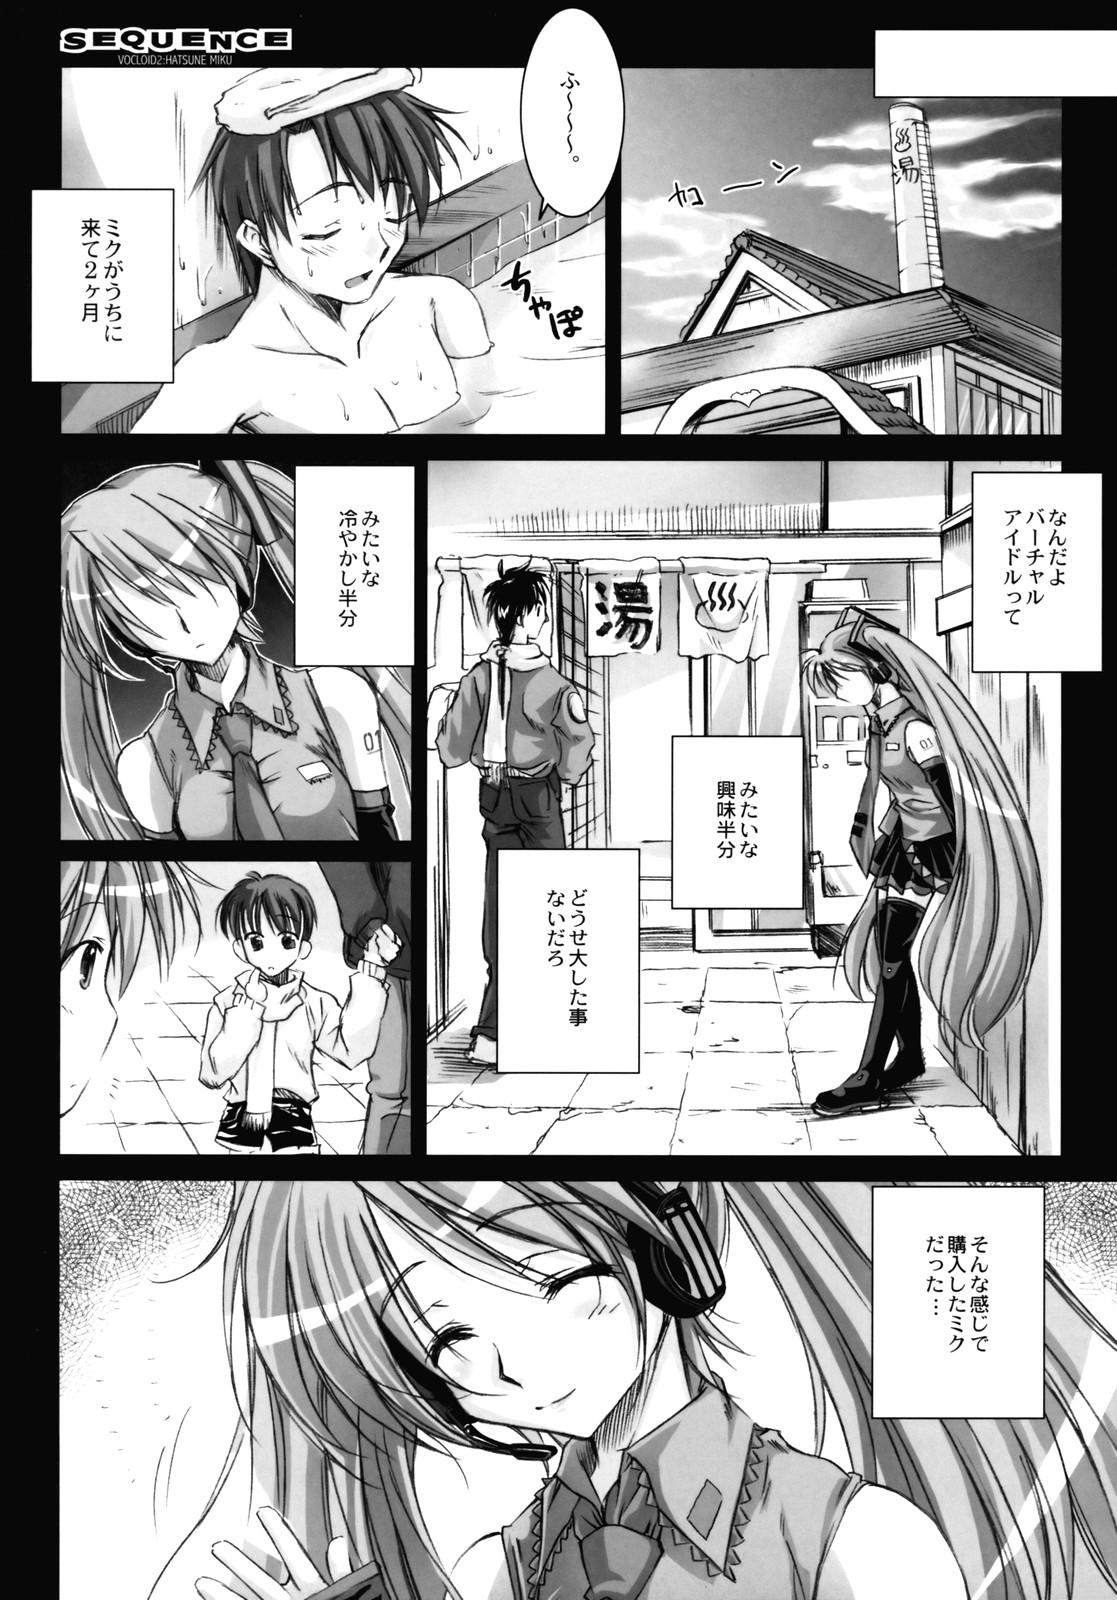 Hottie SEQUENCE - Vocaloid Bareback - Page 6